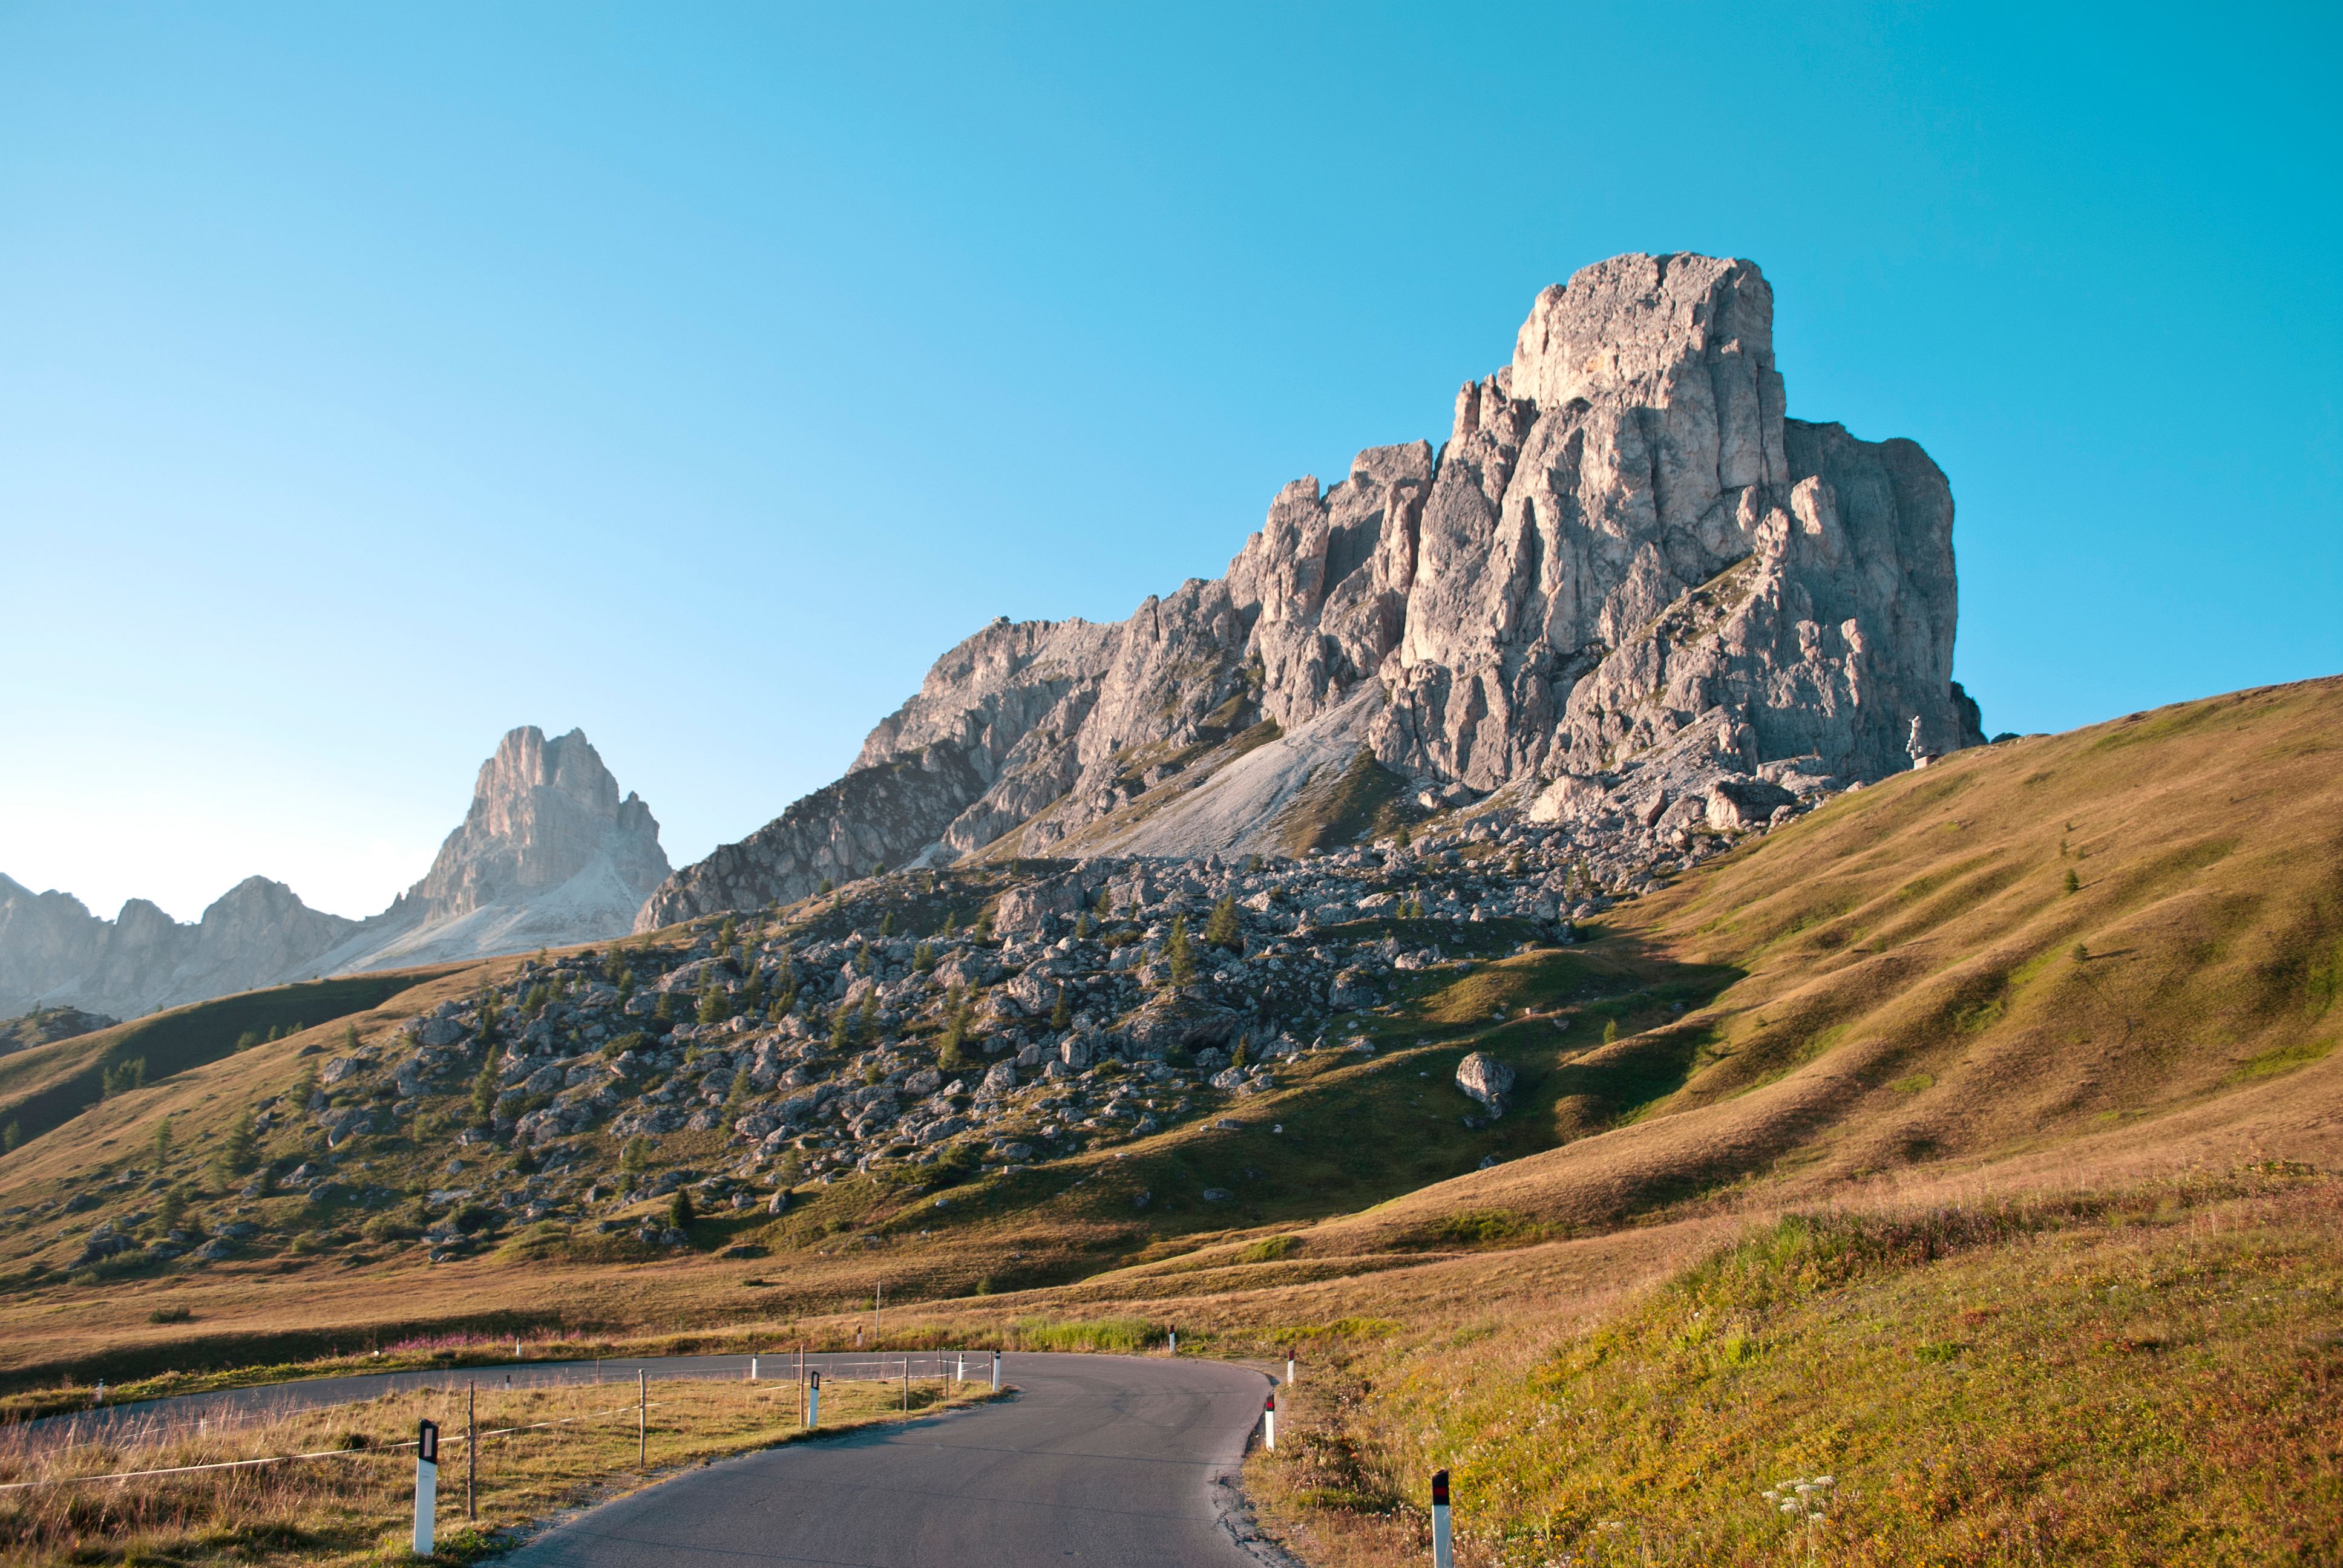 The dolomites are probably one of the most iconic areas for cycling